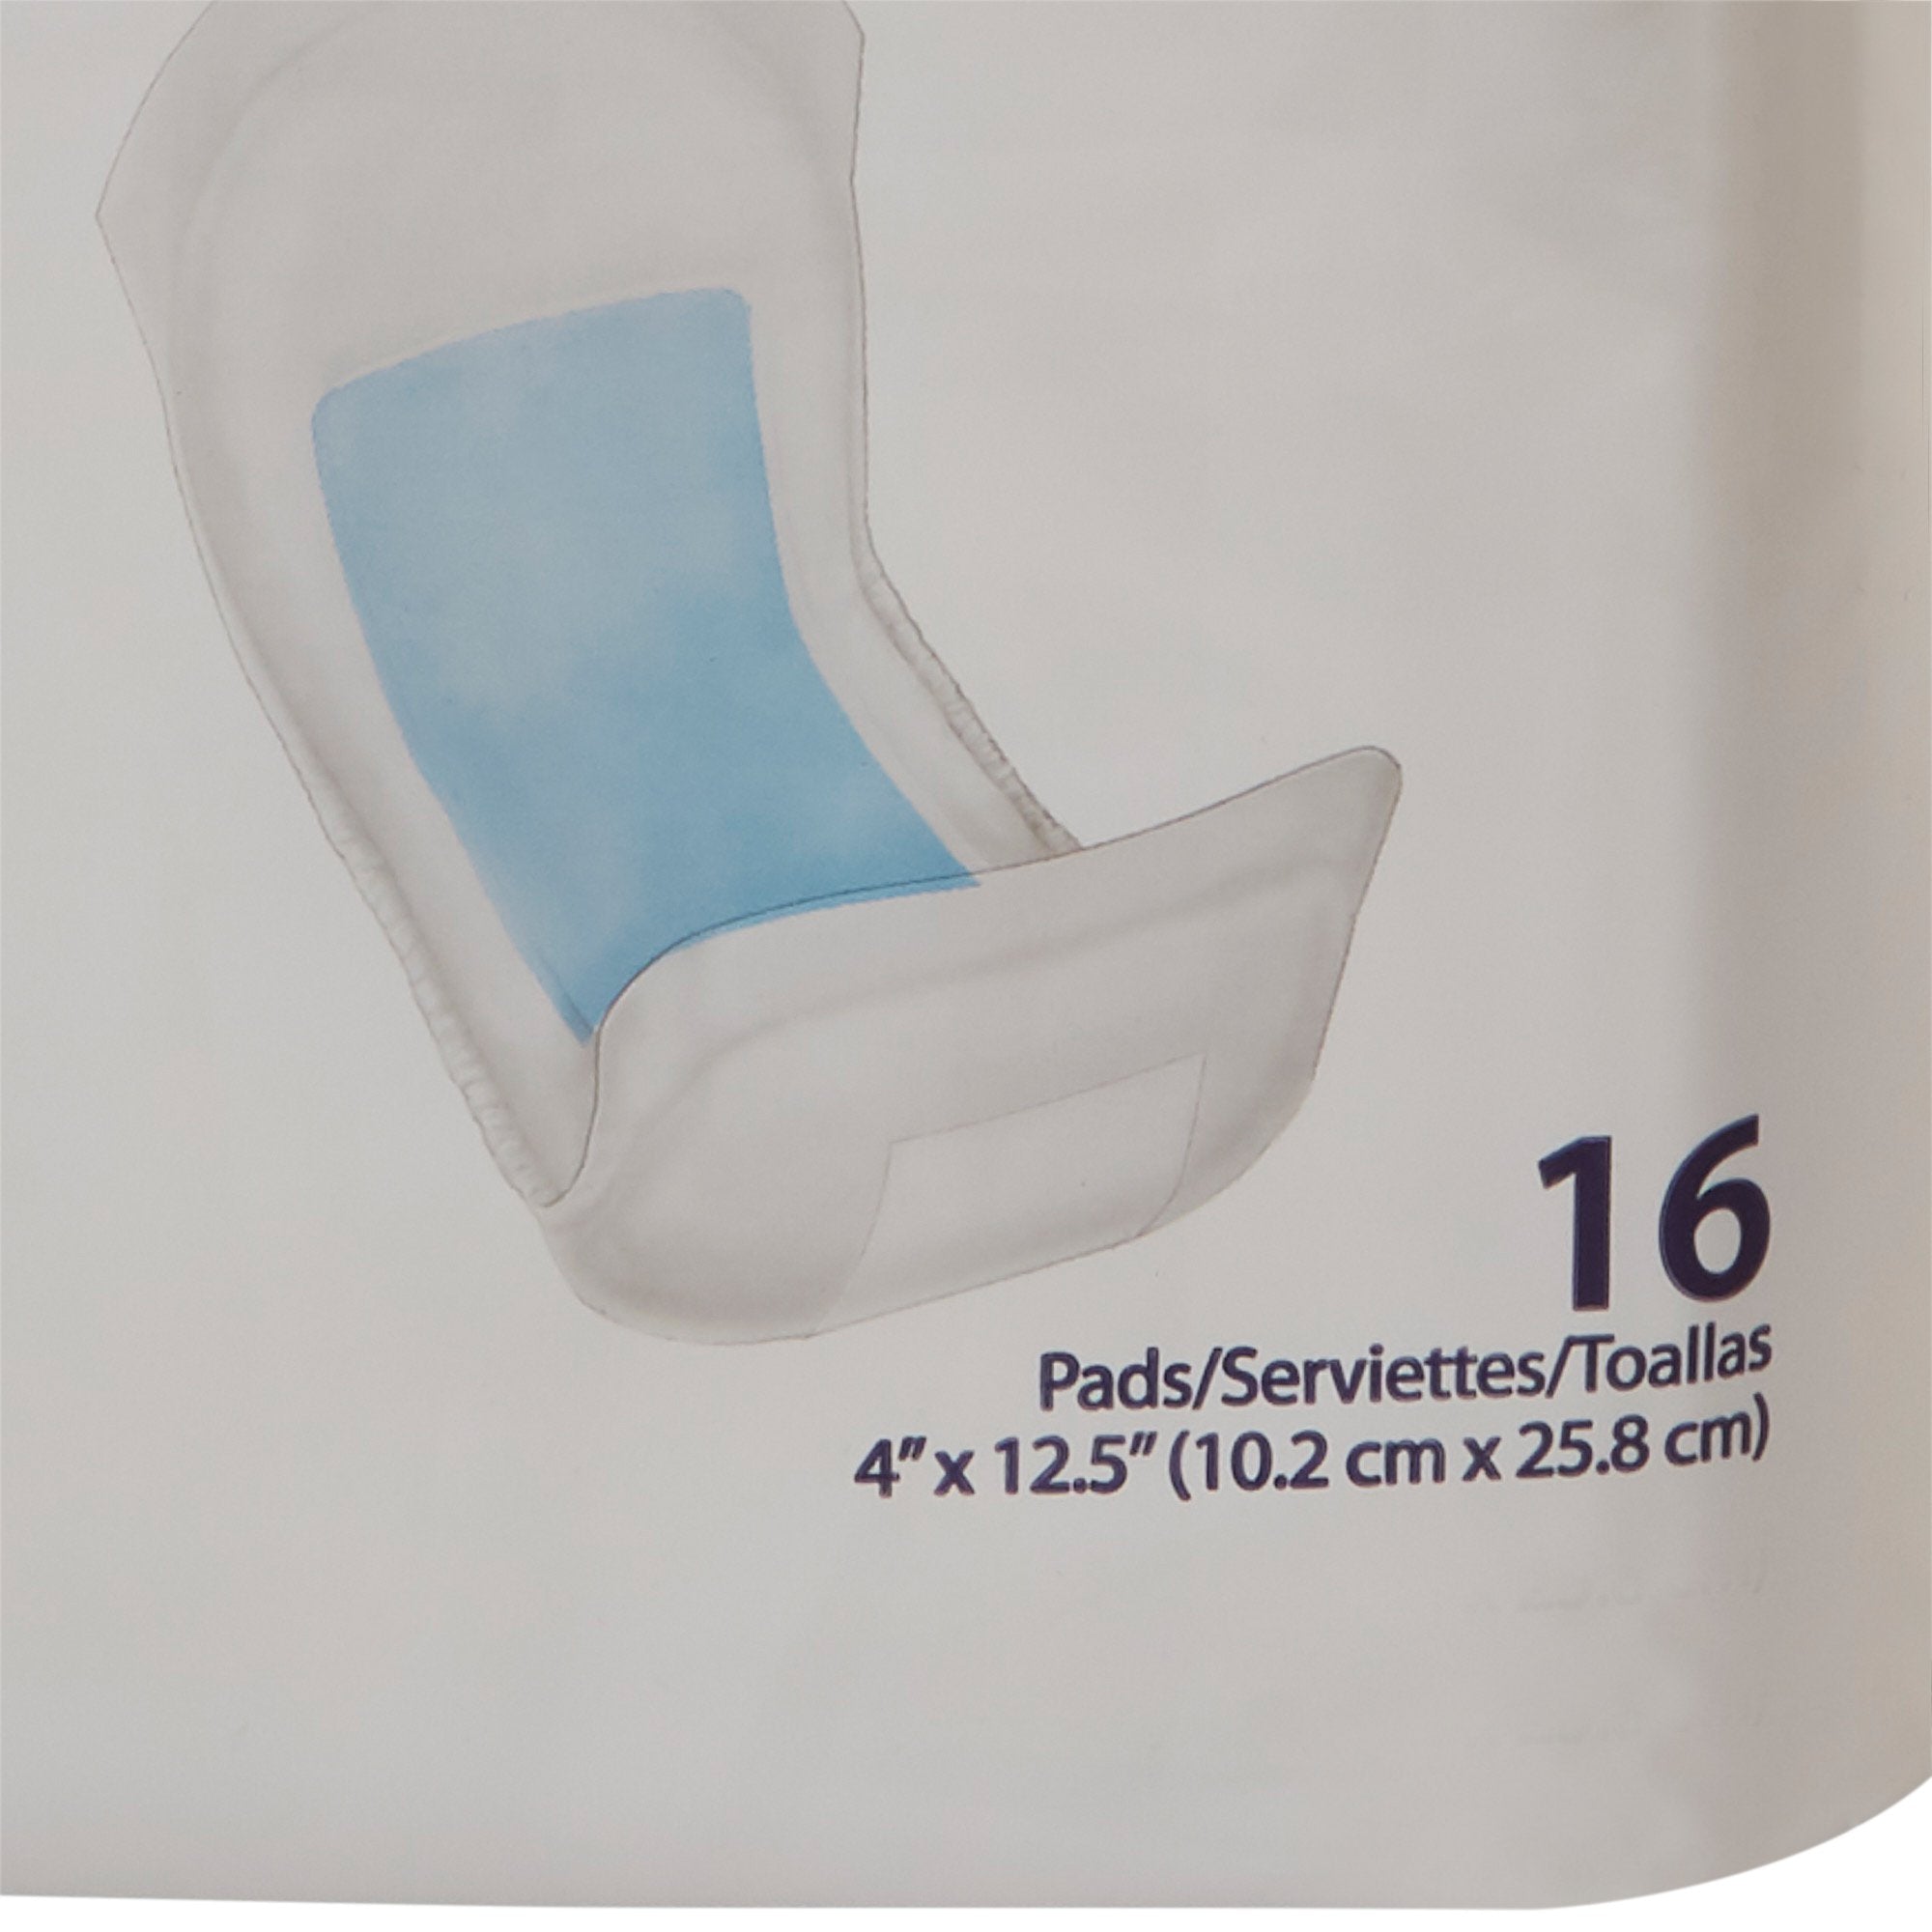 Bladder Control Pad Sure Care 4 X 12-1/2 Inch Heavy Absorbency Polymer Core One Size Fits Most